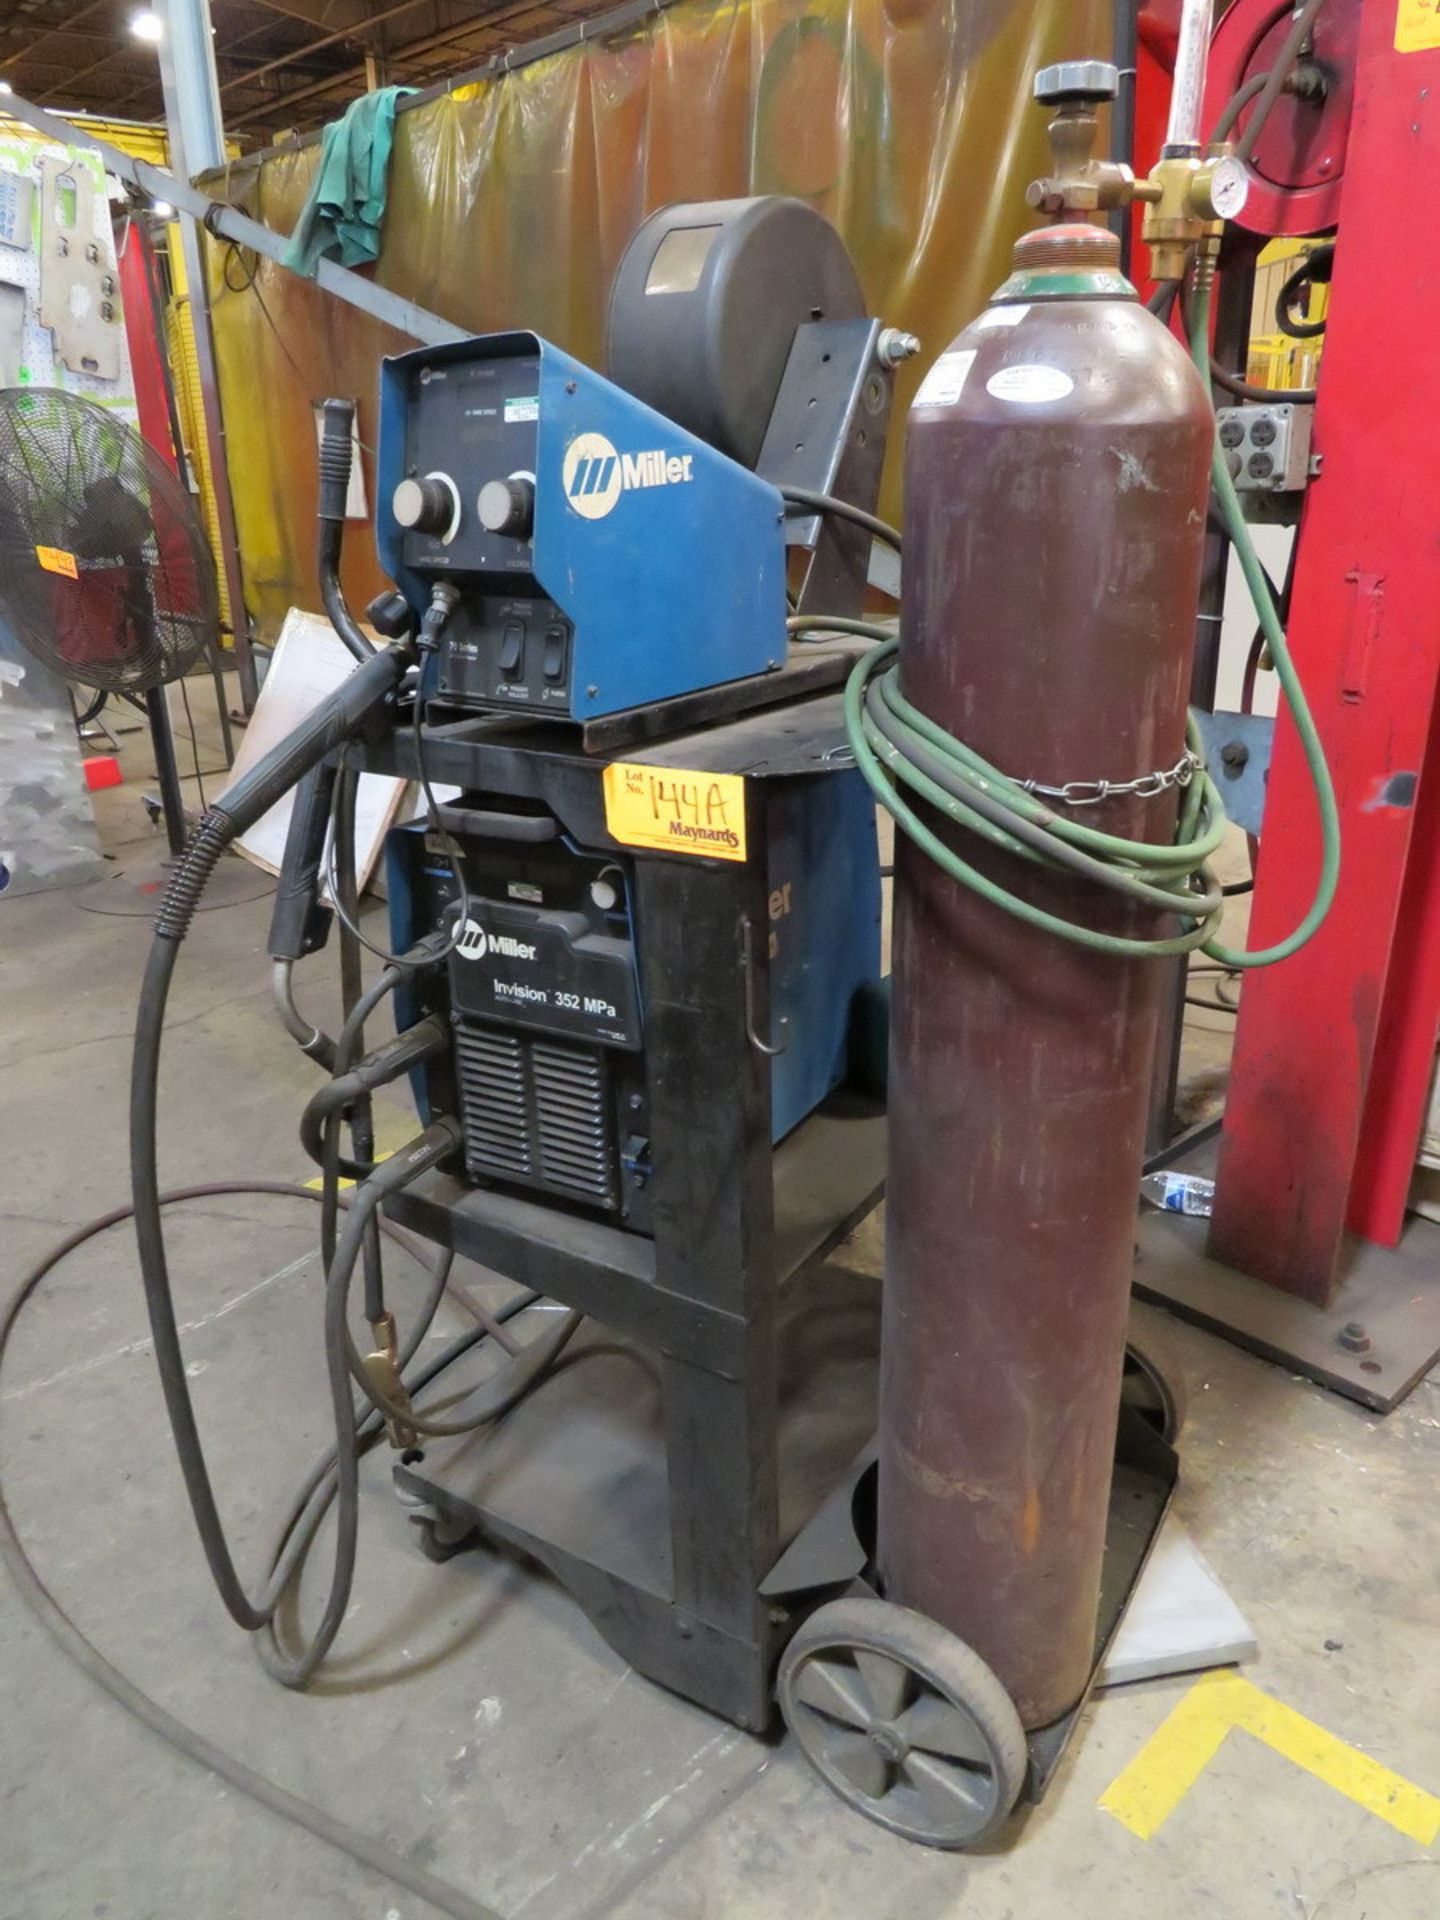 2010 Miller Invision 352MPa Welding Power Source